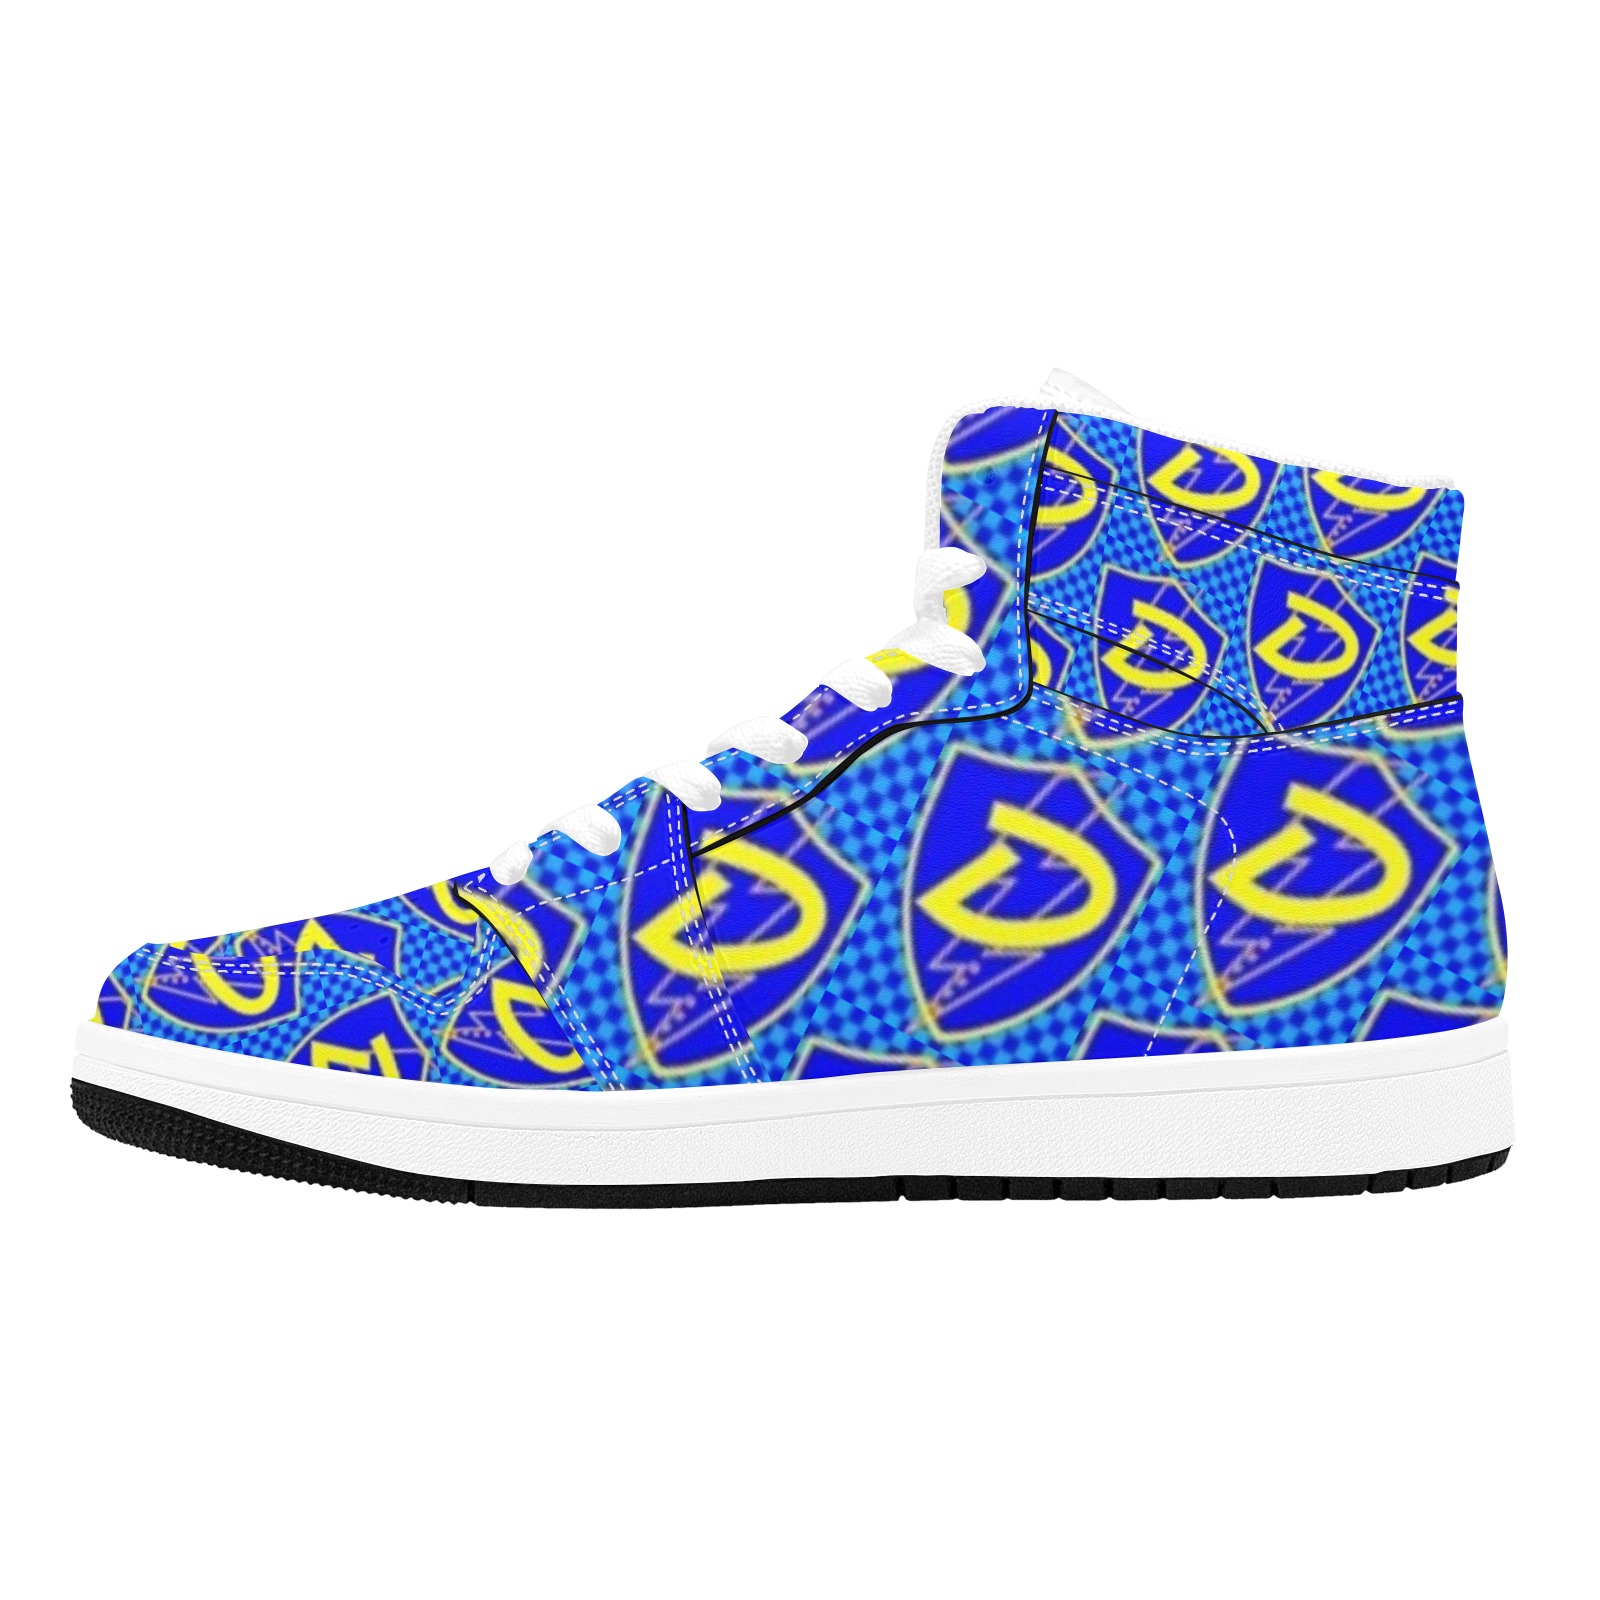 DIONIO - Blue & Yellow Repeat D Shield Logo Leather Sneakers Men's High Top Sneakers (Model 20042)